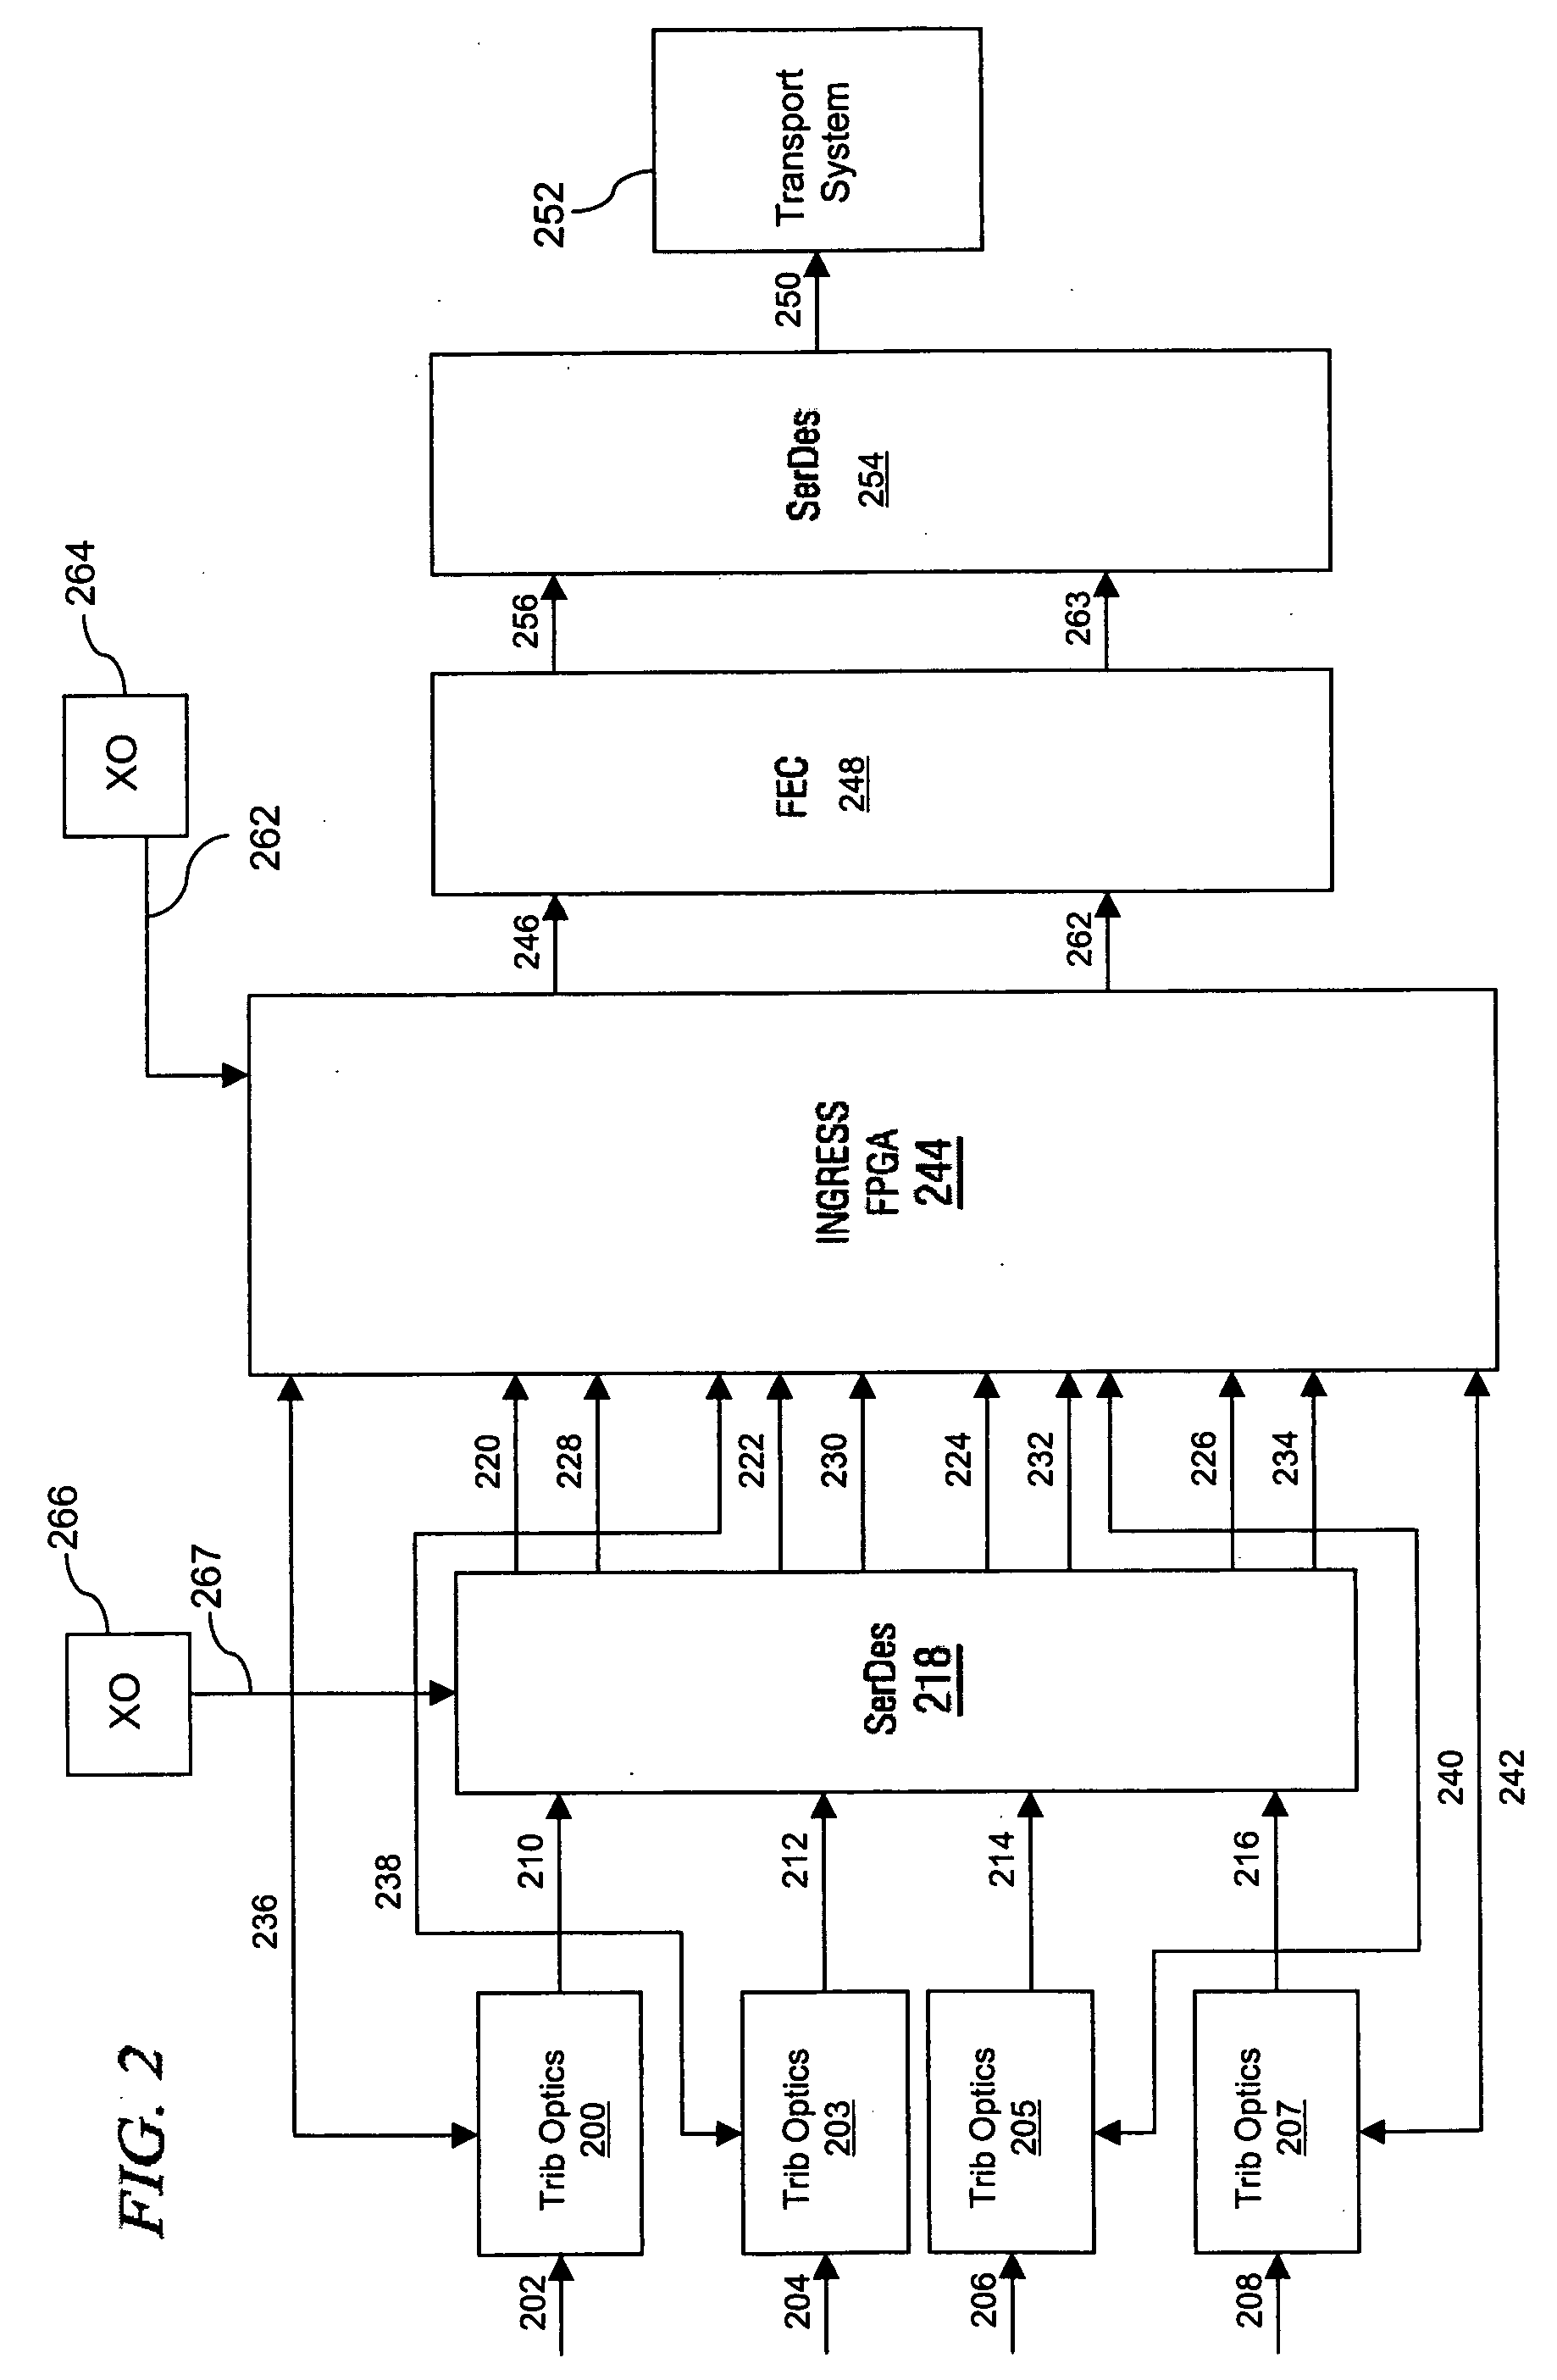 Apparatus and method for fibre channel distance extension embedded within an optical transport system